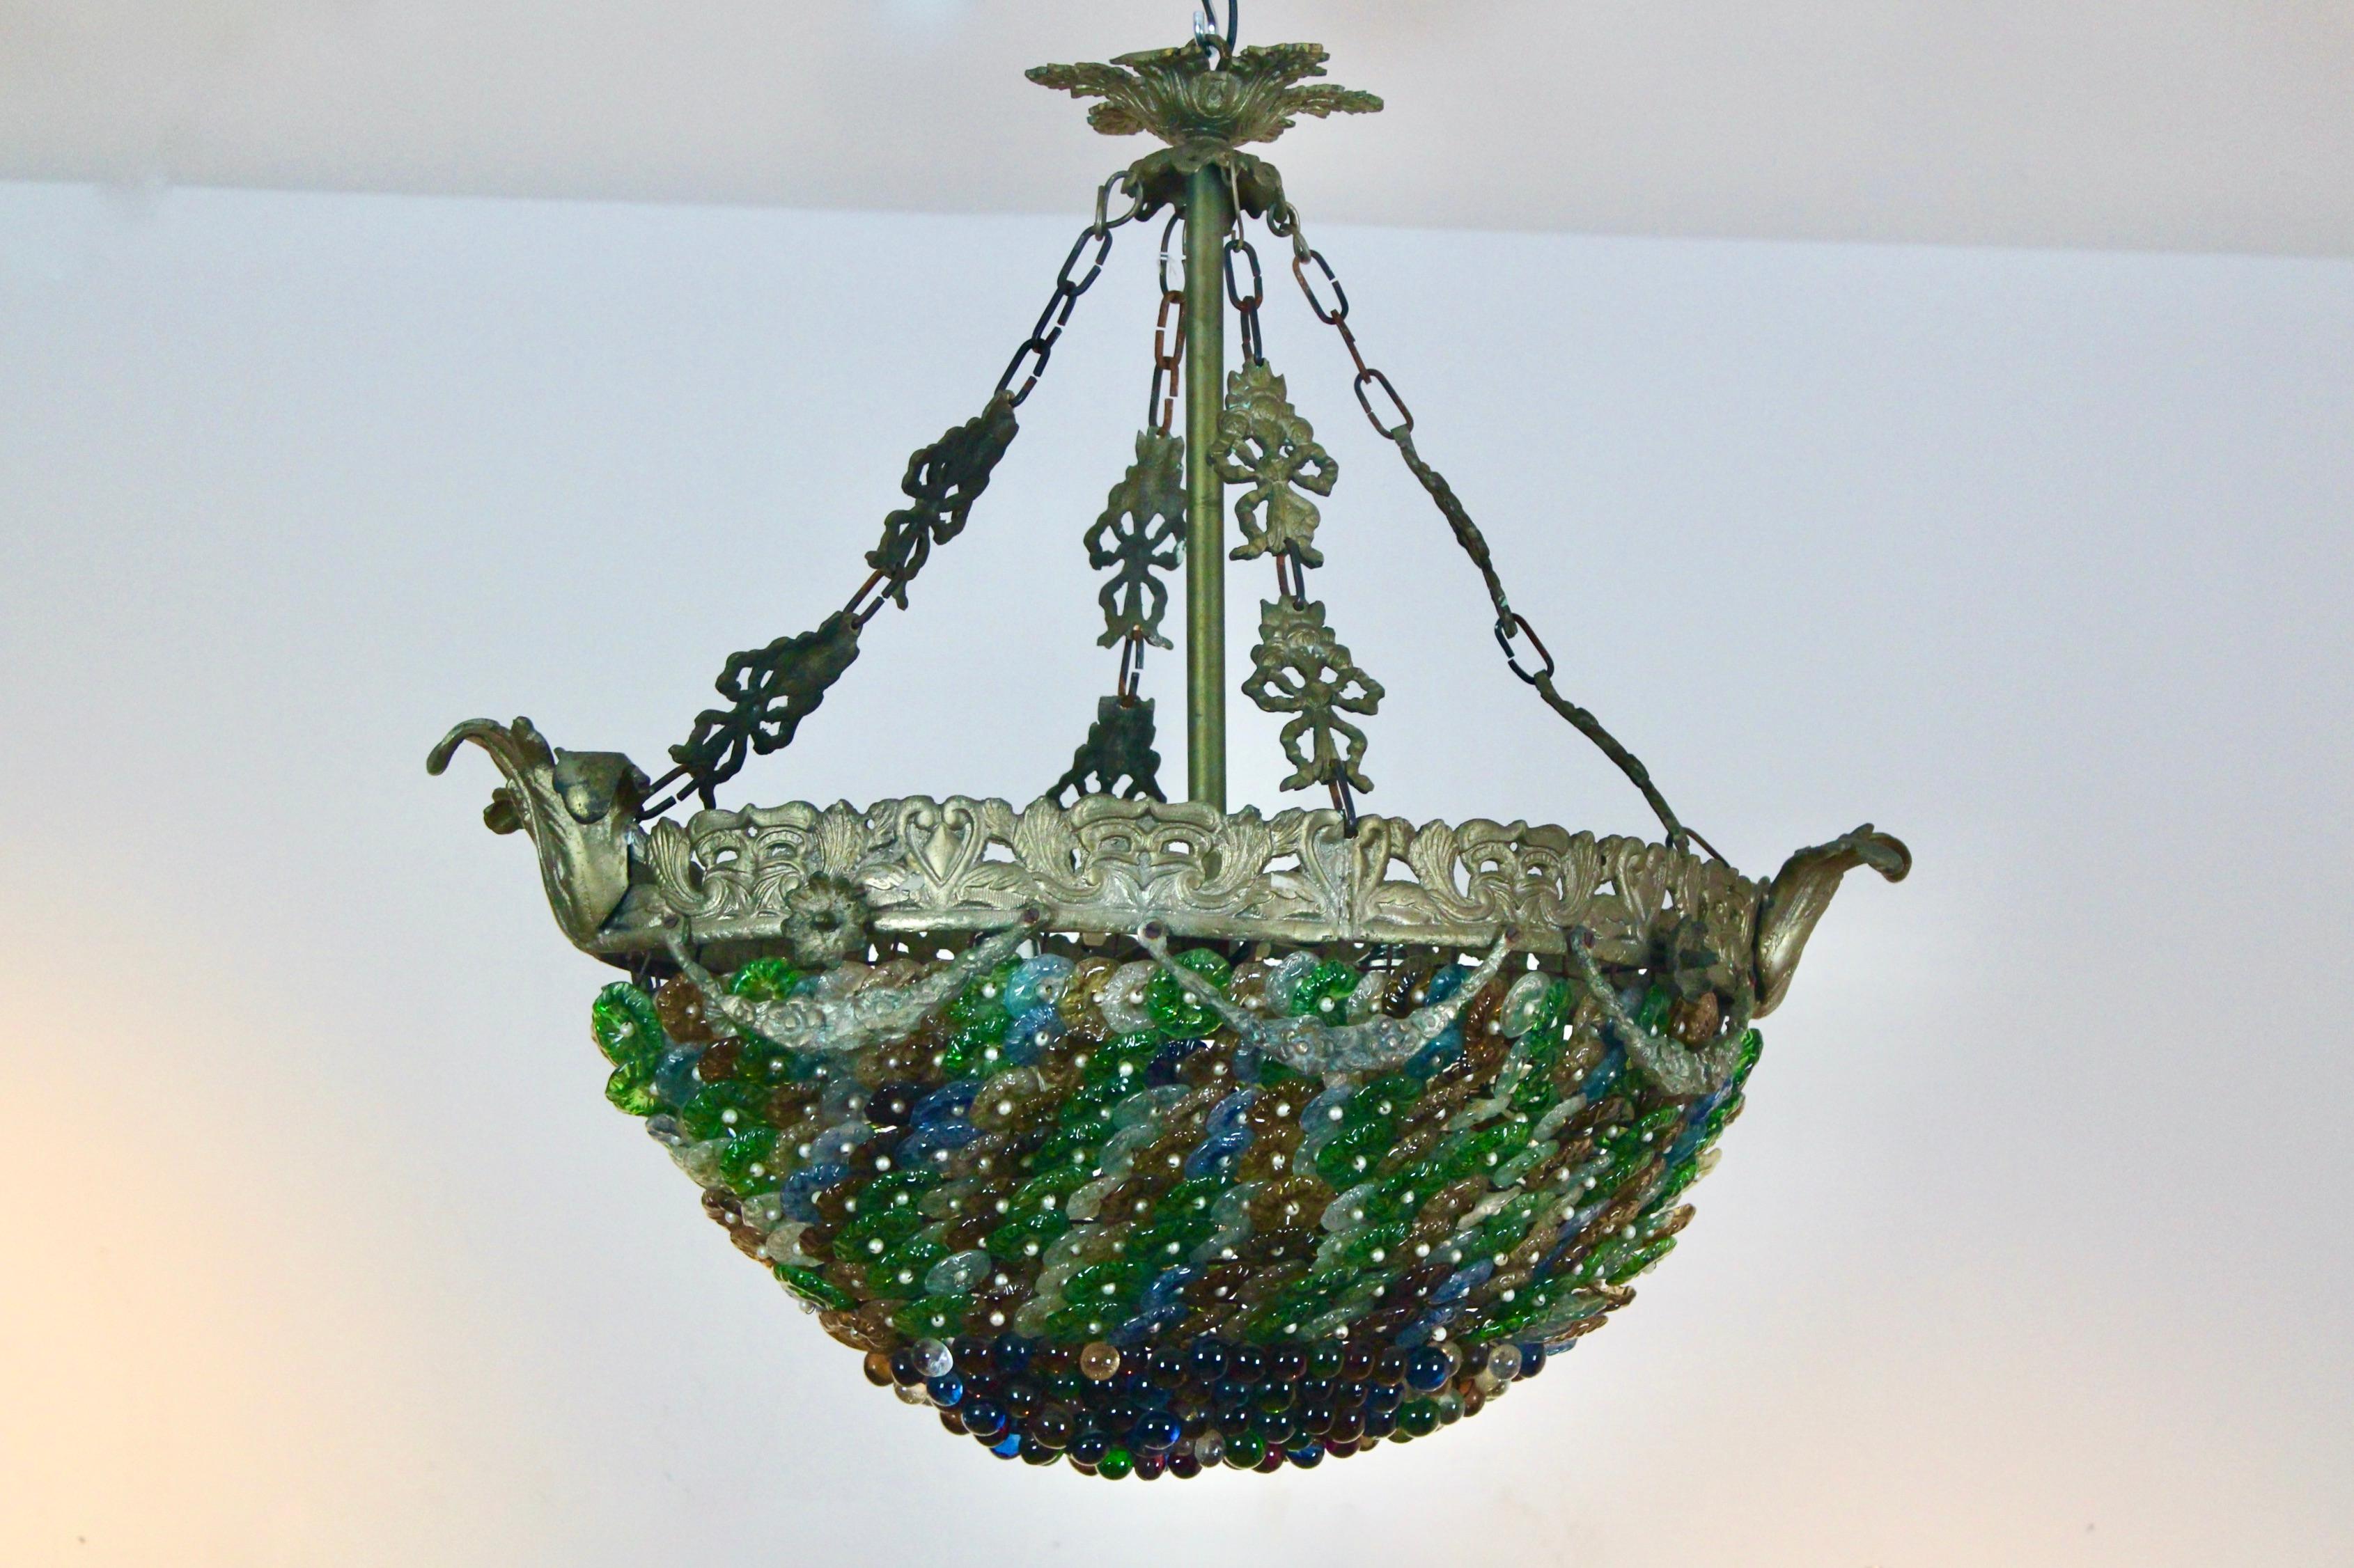 A very elegant neoclassical chandelier composed of diecast and colorful Italian Murano glass drops and flowers in many colors. Produced in Italy in the 1930s. Consisting of many transparent, green, white, amber, yellow, red and blue individually